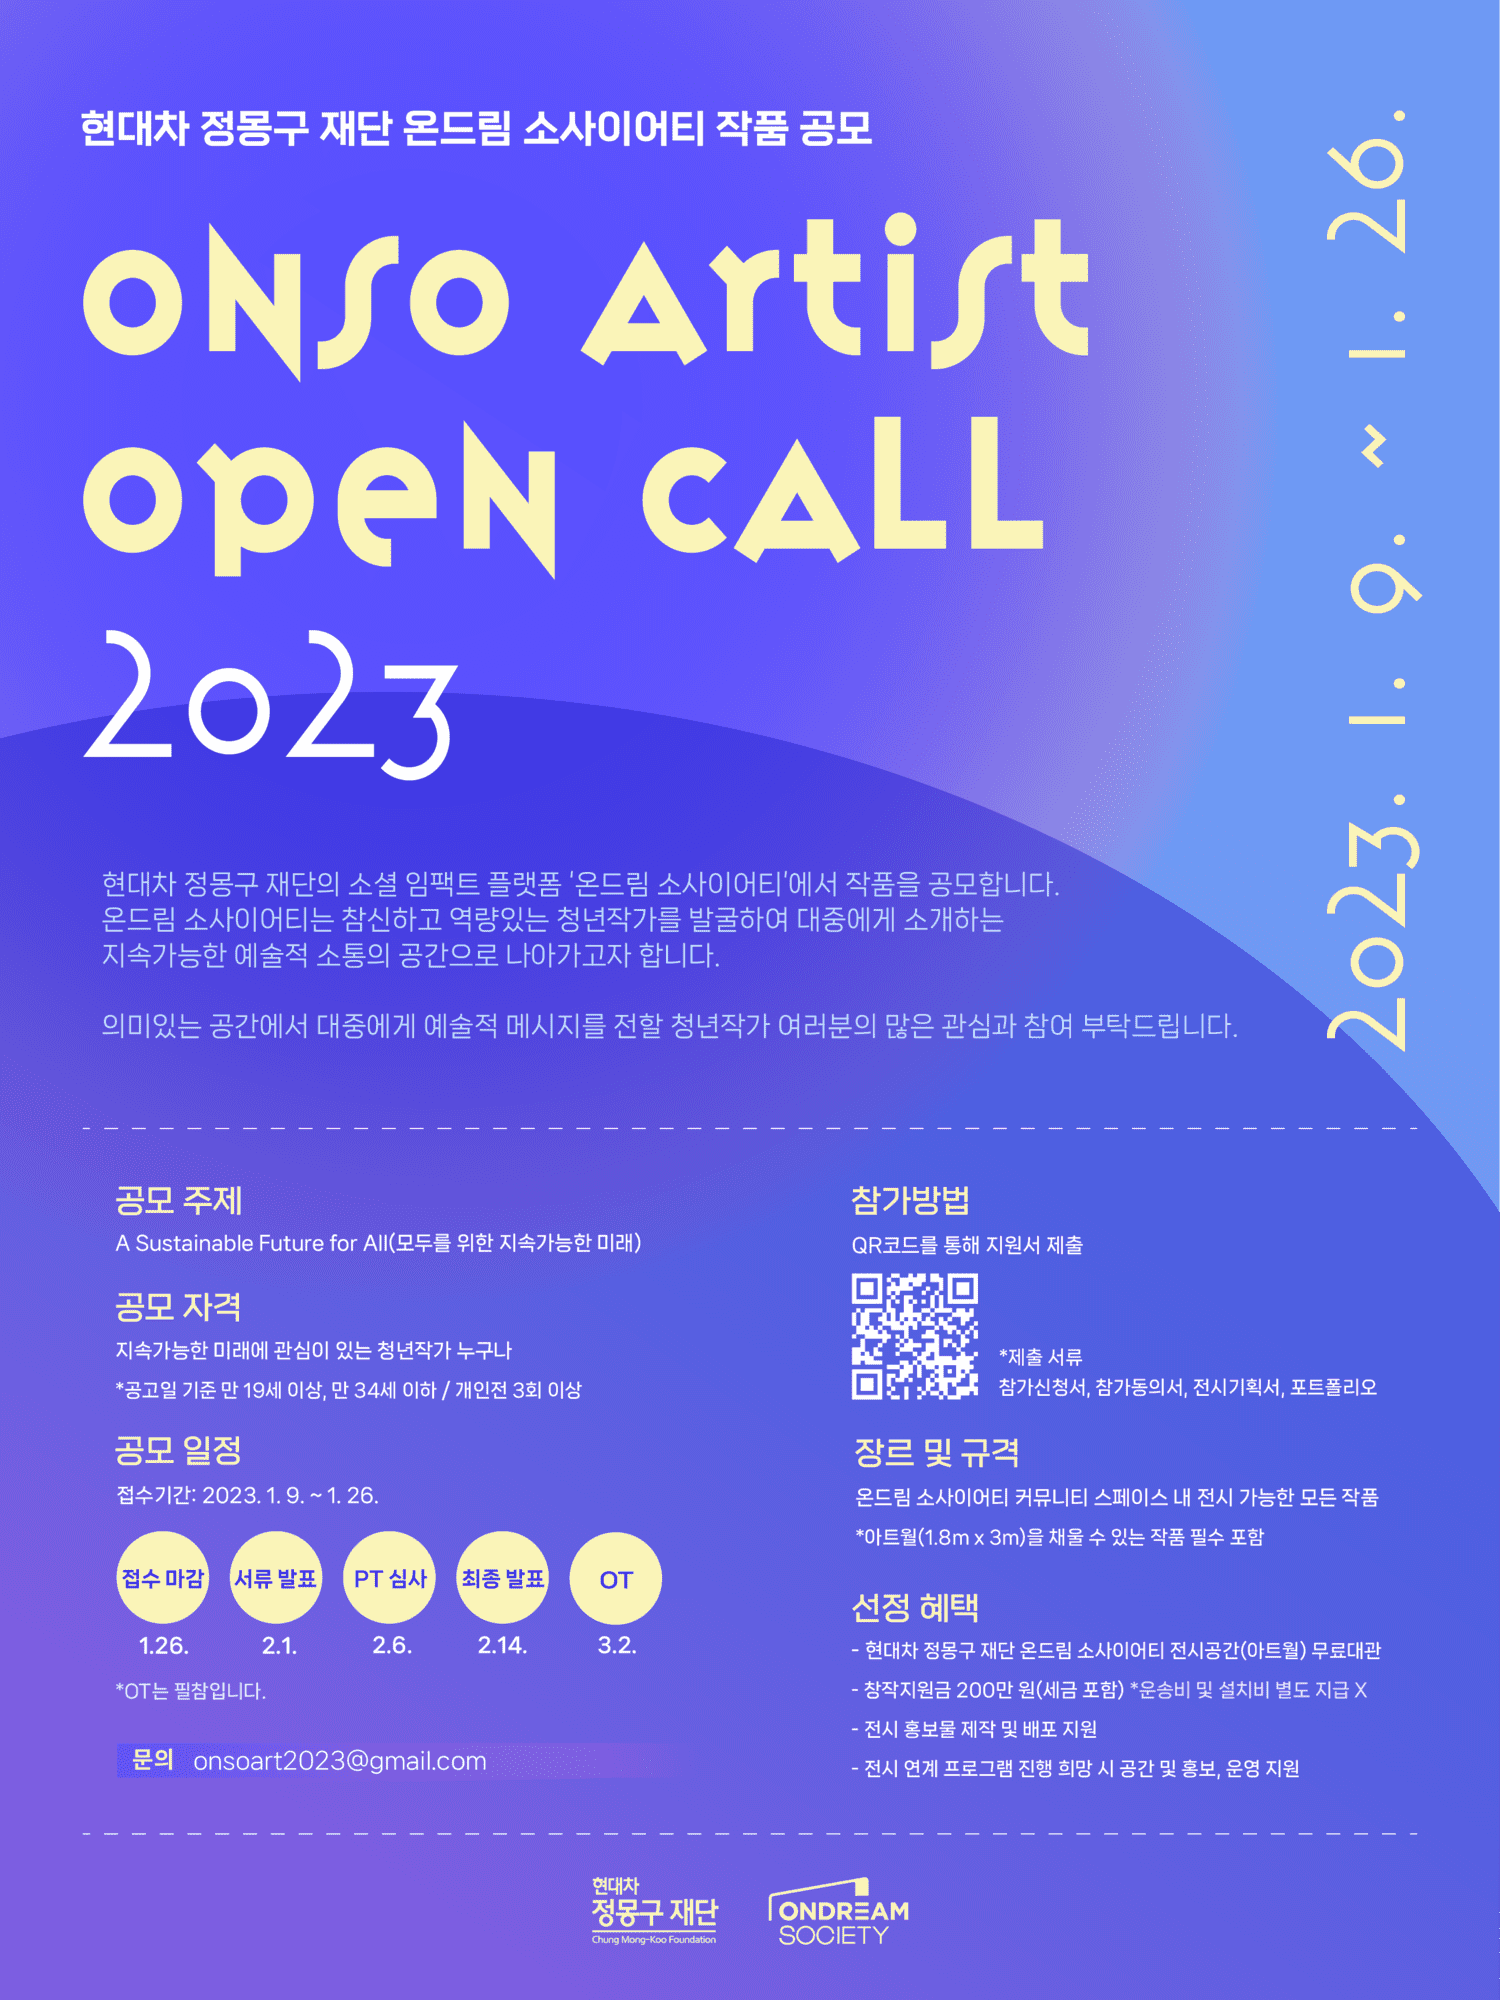 ONSO ARTIST OPEN CALL 2023